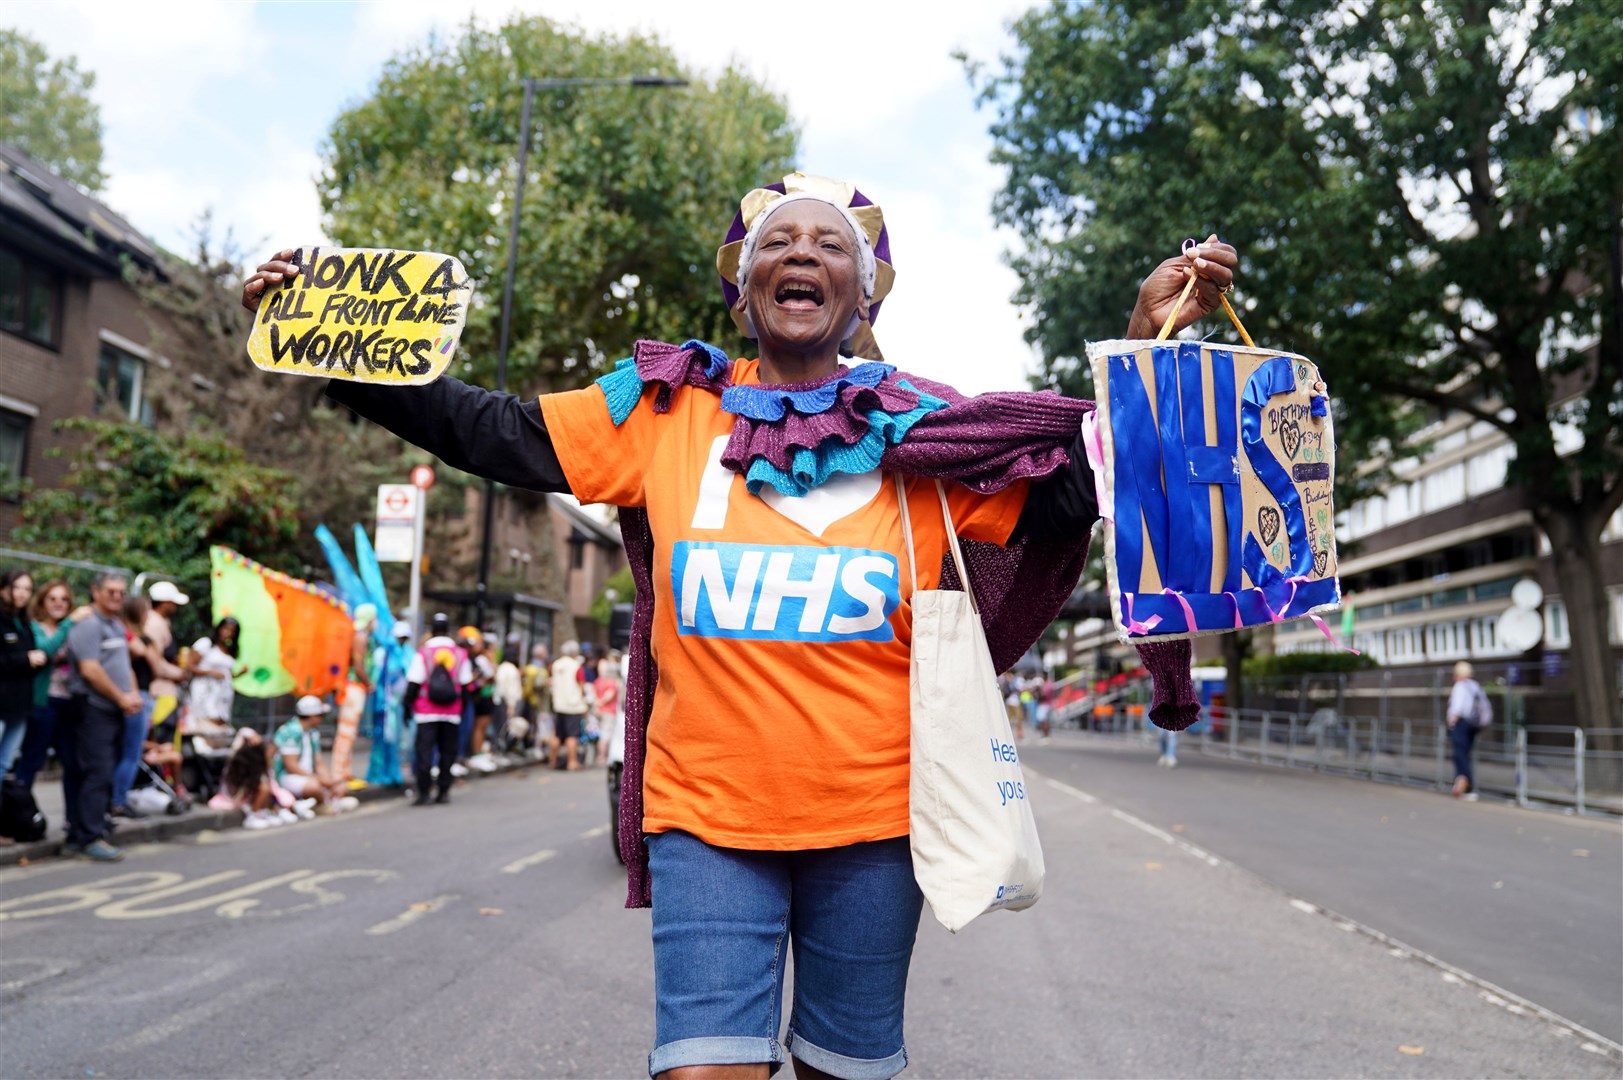 An NHS supporter was among those at the carnival (James Manning/PA)